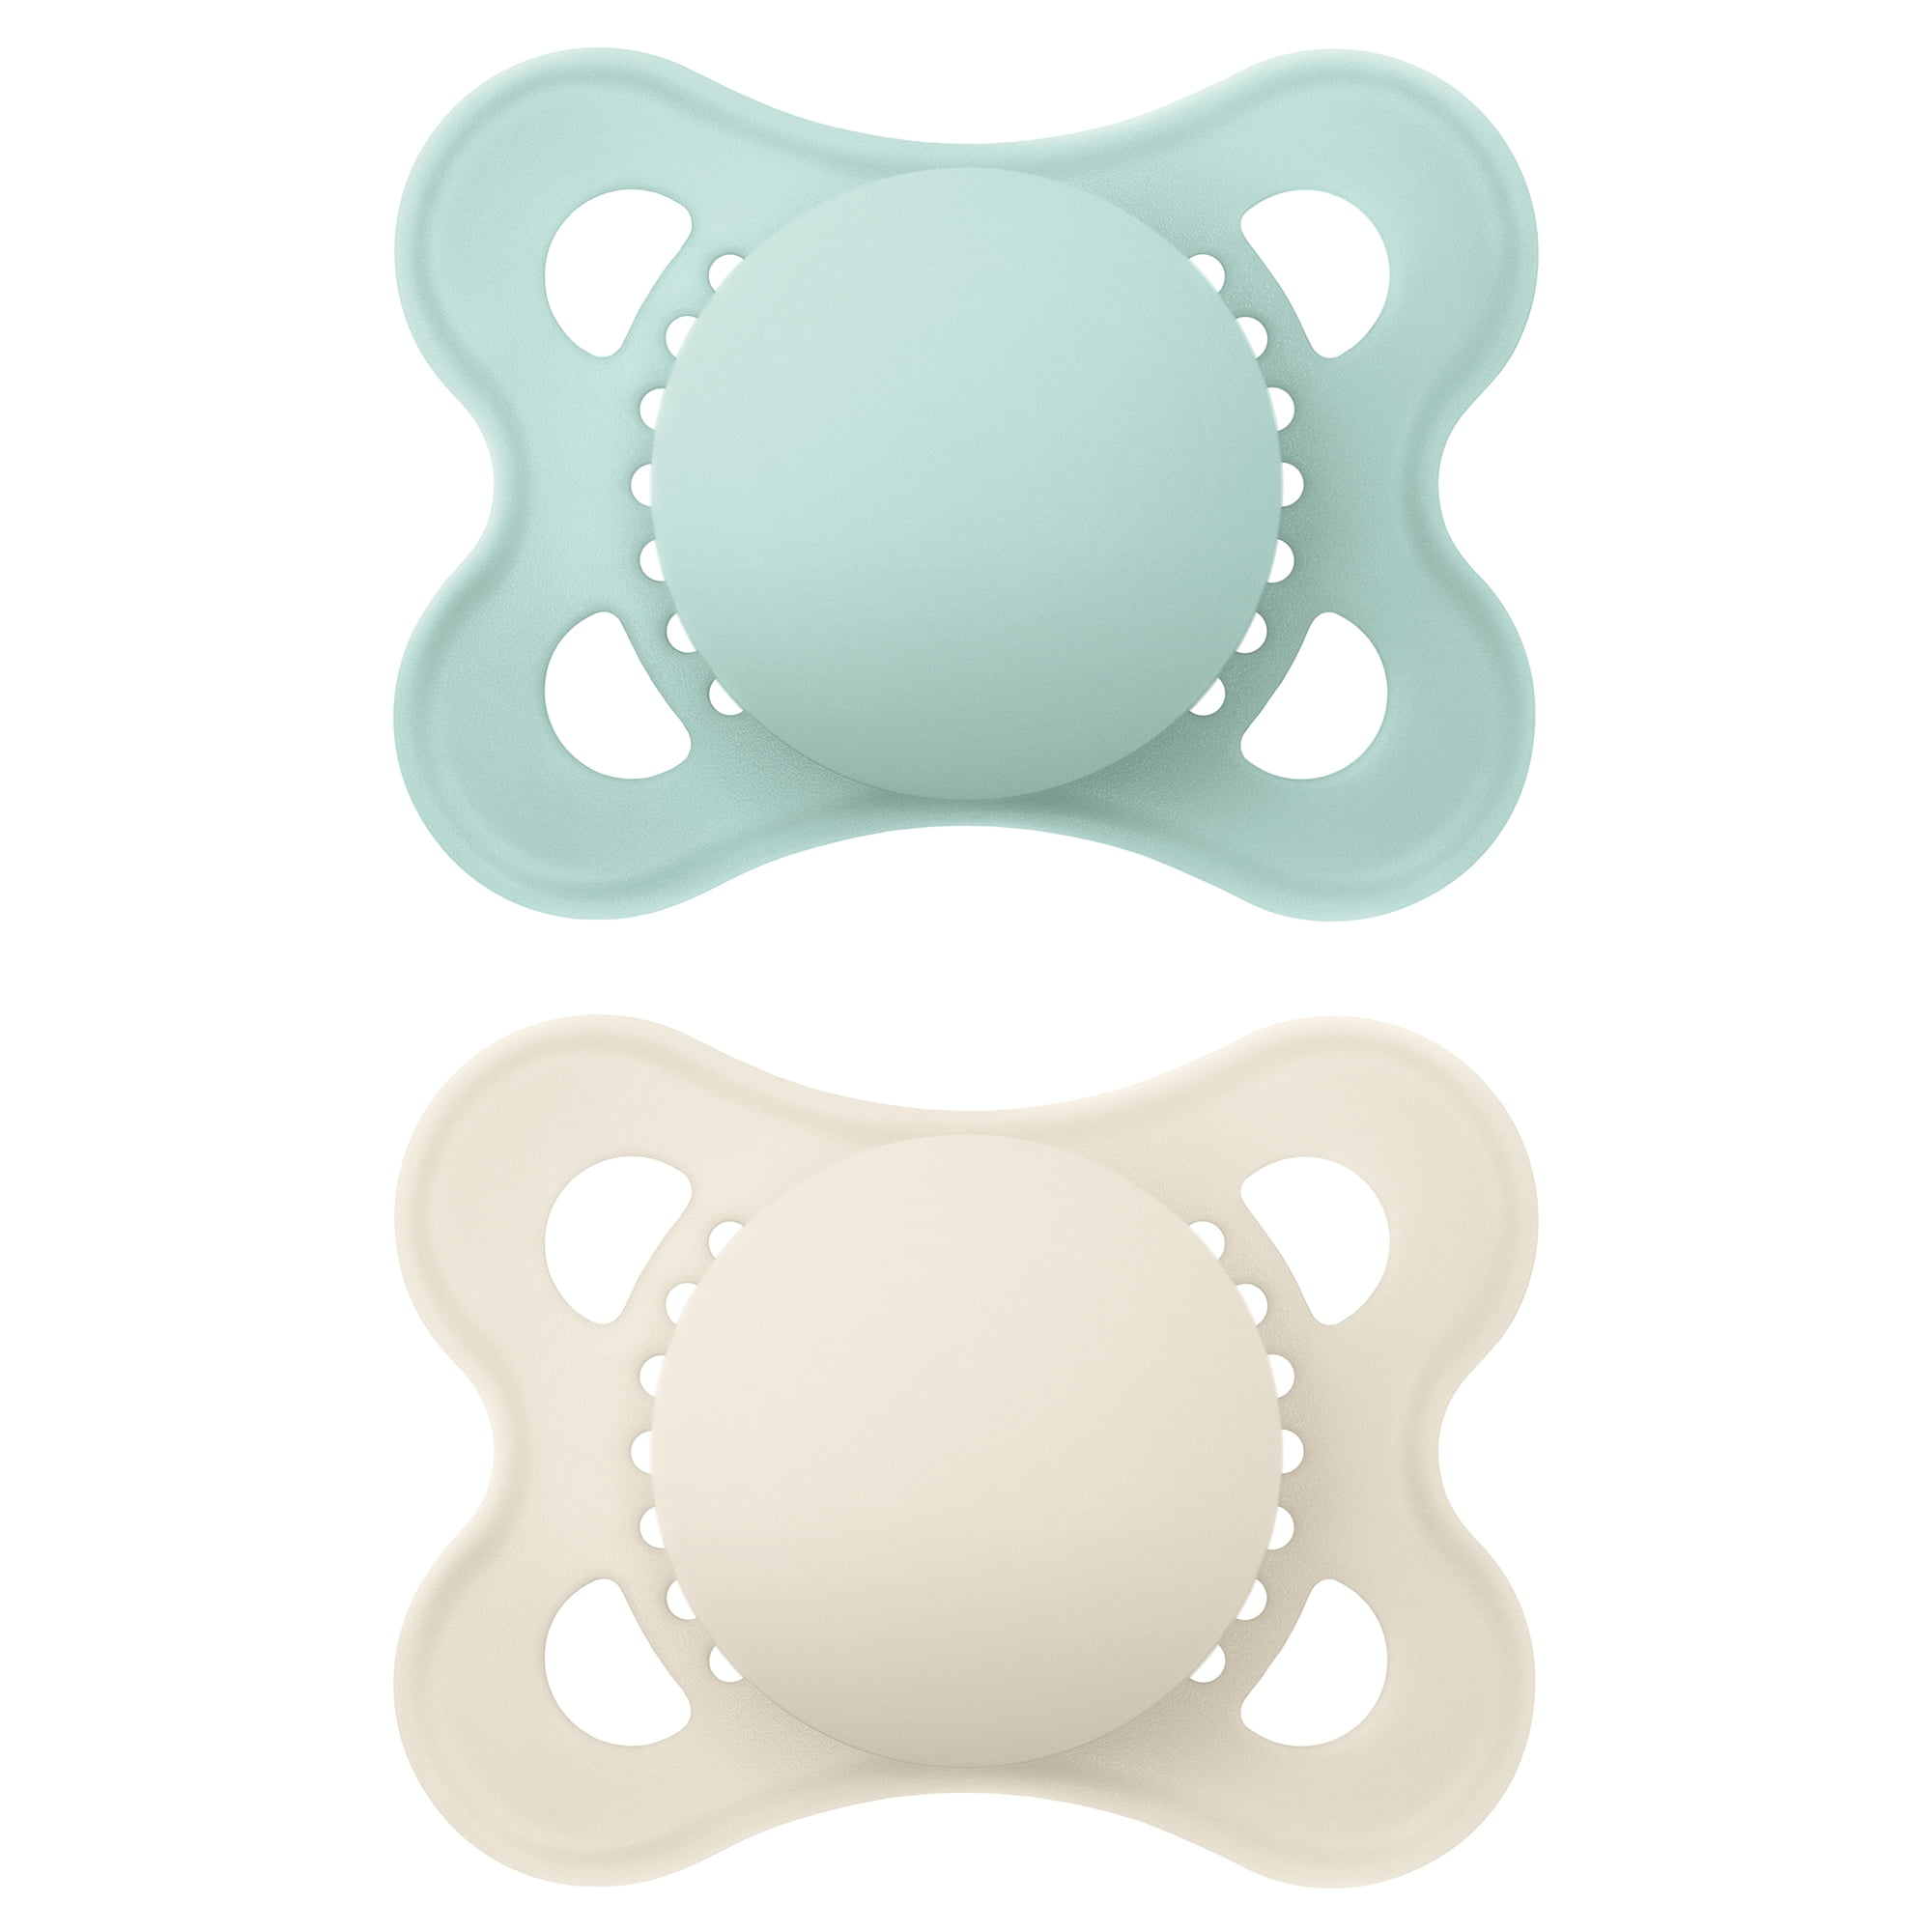 Whale/Lobster Tooth-Friendly Dummy MAM Original Silicone Dummies in a Set of 2 Baby Dummy Made of Special MAM SkinSoft Silicone with Dummy Box 0-6 Months